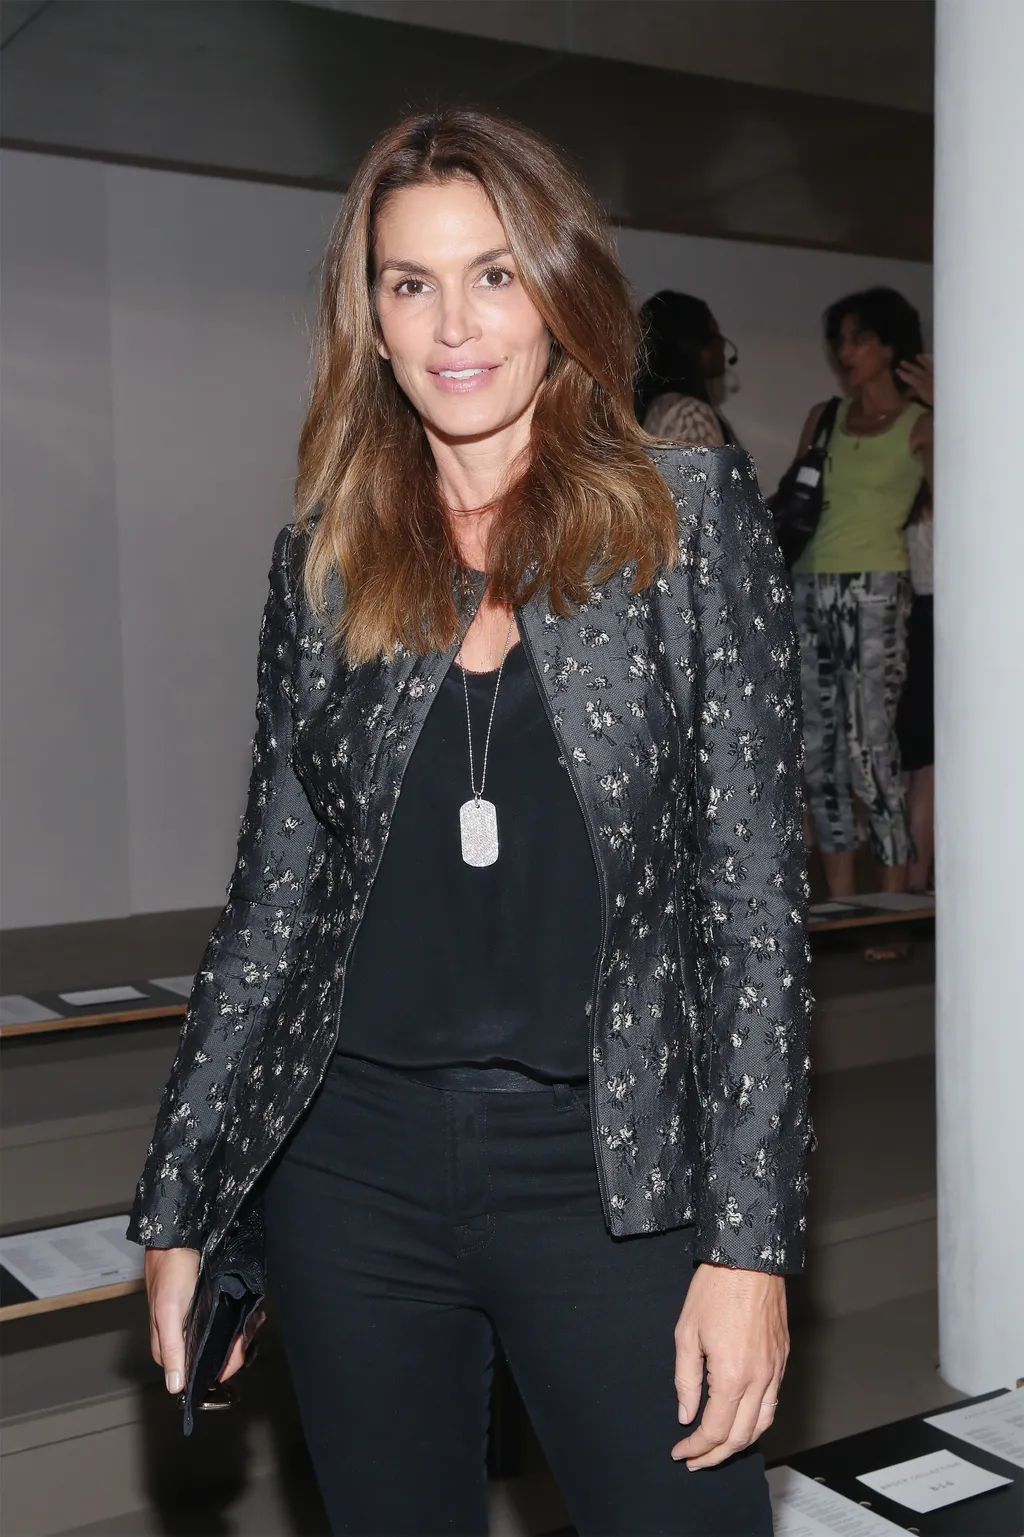 Brock Collection - Front Row - September 2016 - MADE Fashion Week GettyImageRank2 VERTICAL USA New York City FASHION SHOW FASHION MODEL Photography FASHION FASHION WEEK Cindy Crawford Arts Culture and Entertainment Attending Celebrities MILK Studios Fashi